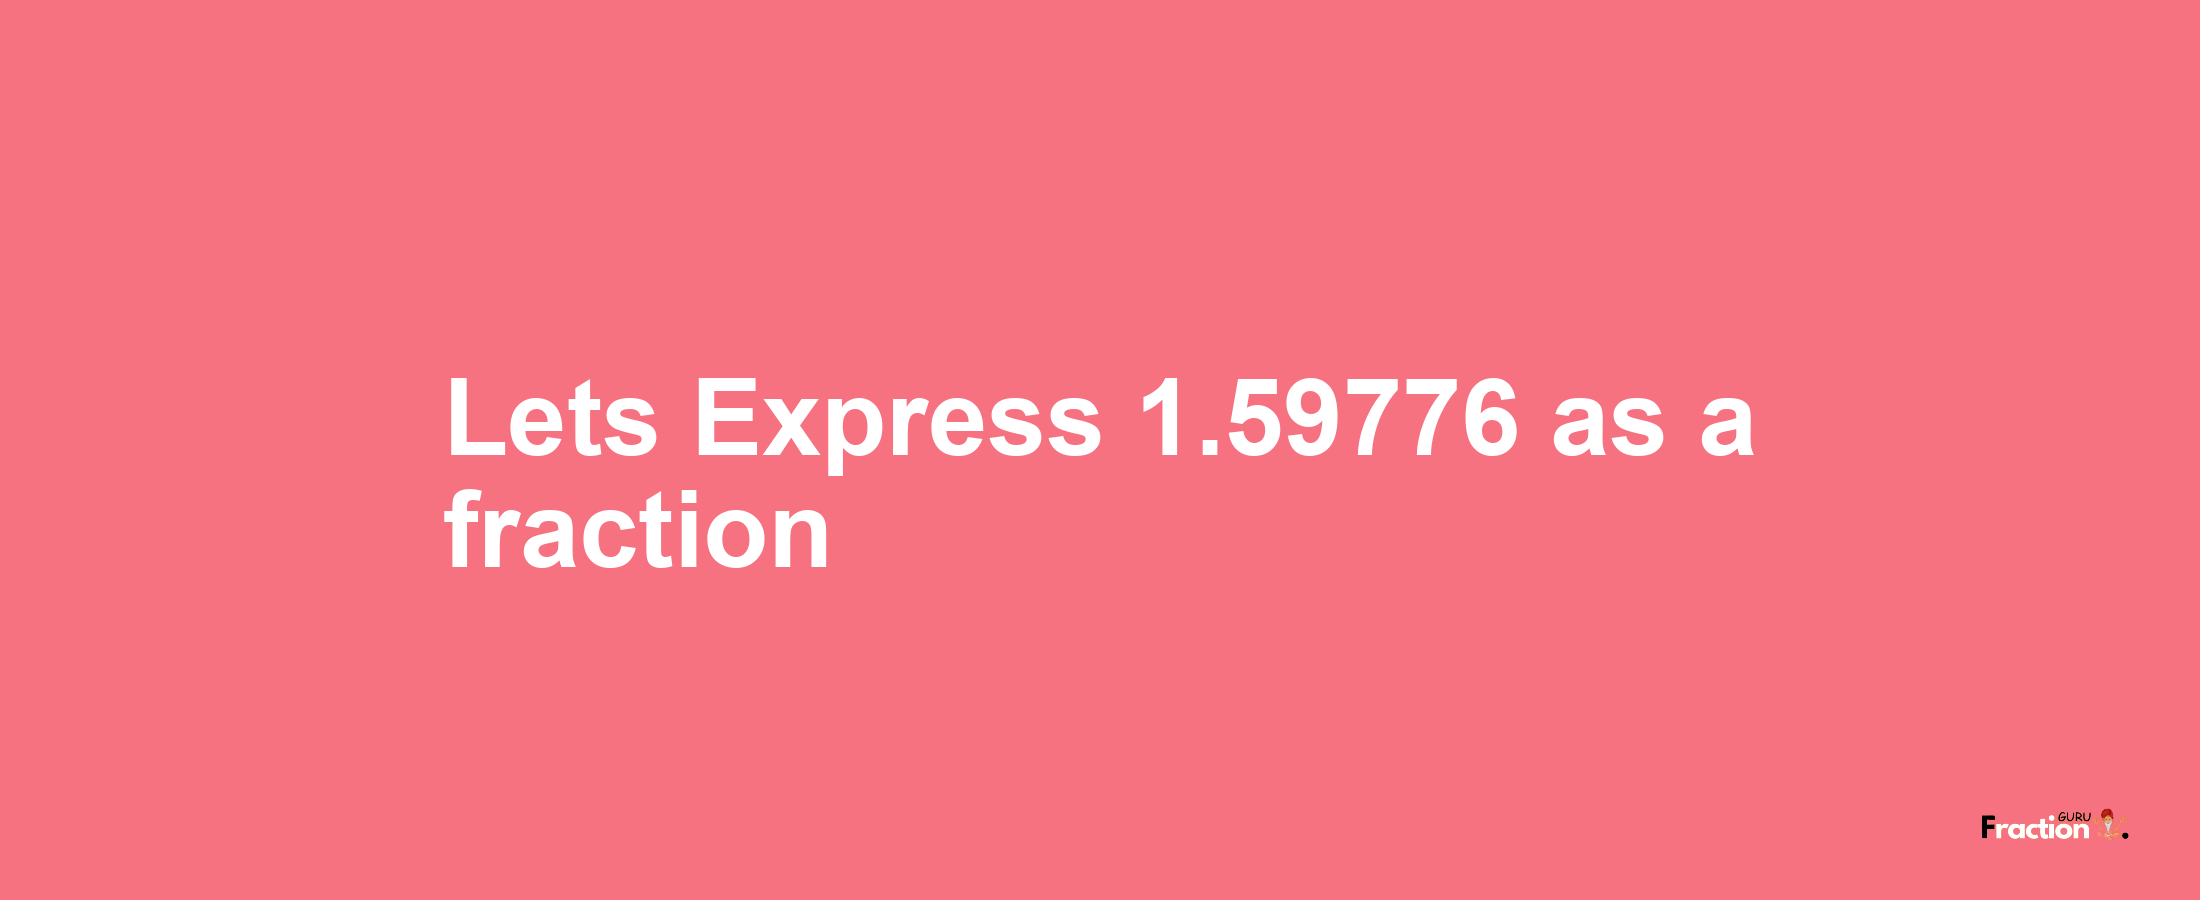 Lets Express 1.59776 as afraction